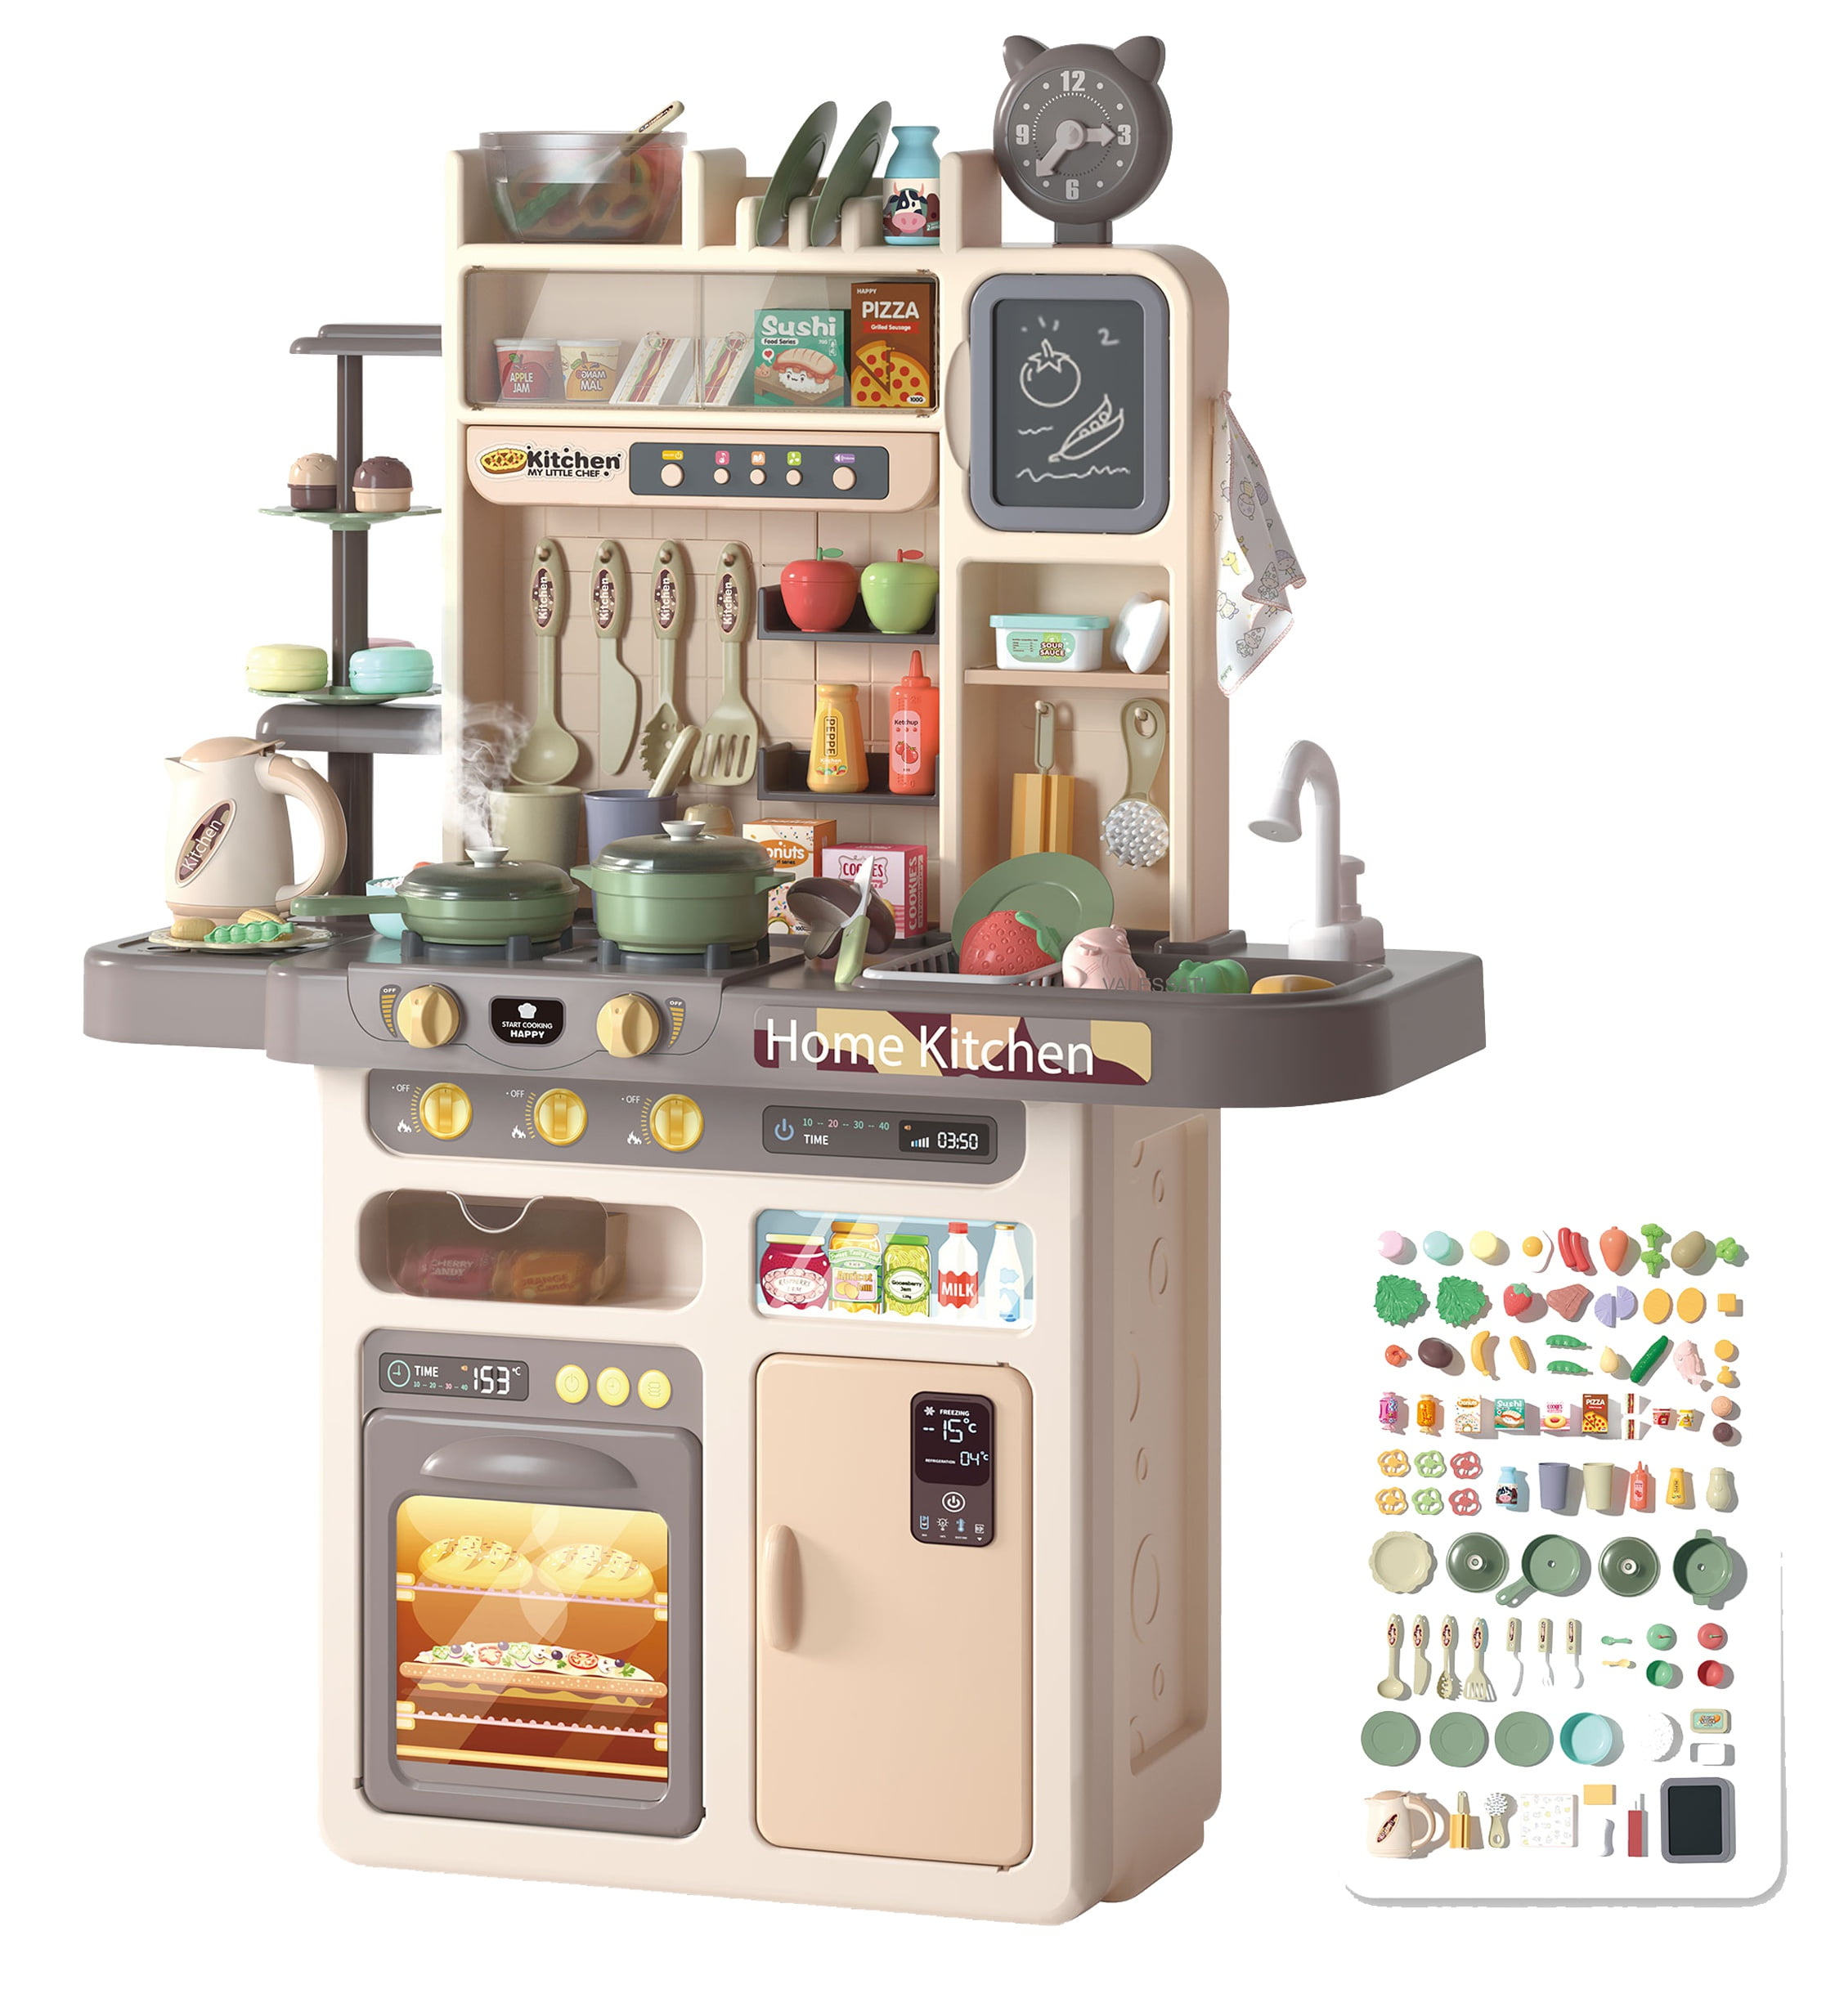 Kitchen and Cooking Set | Kitchen drawing, Food illustrations, Cooking set